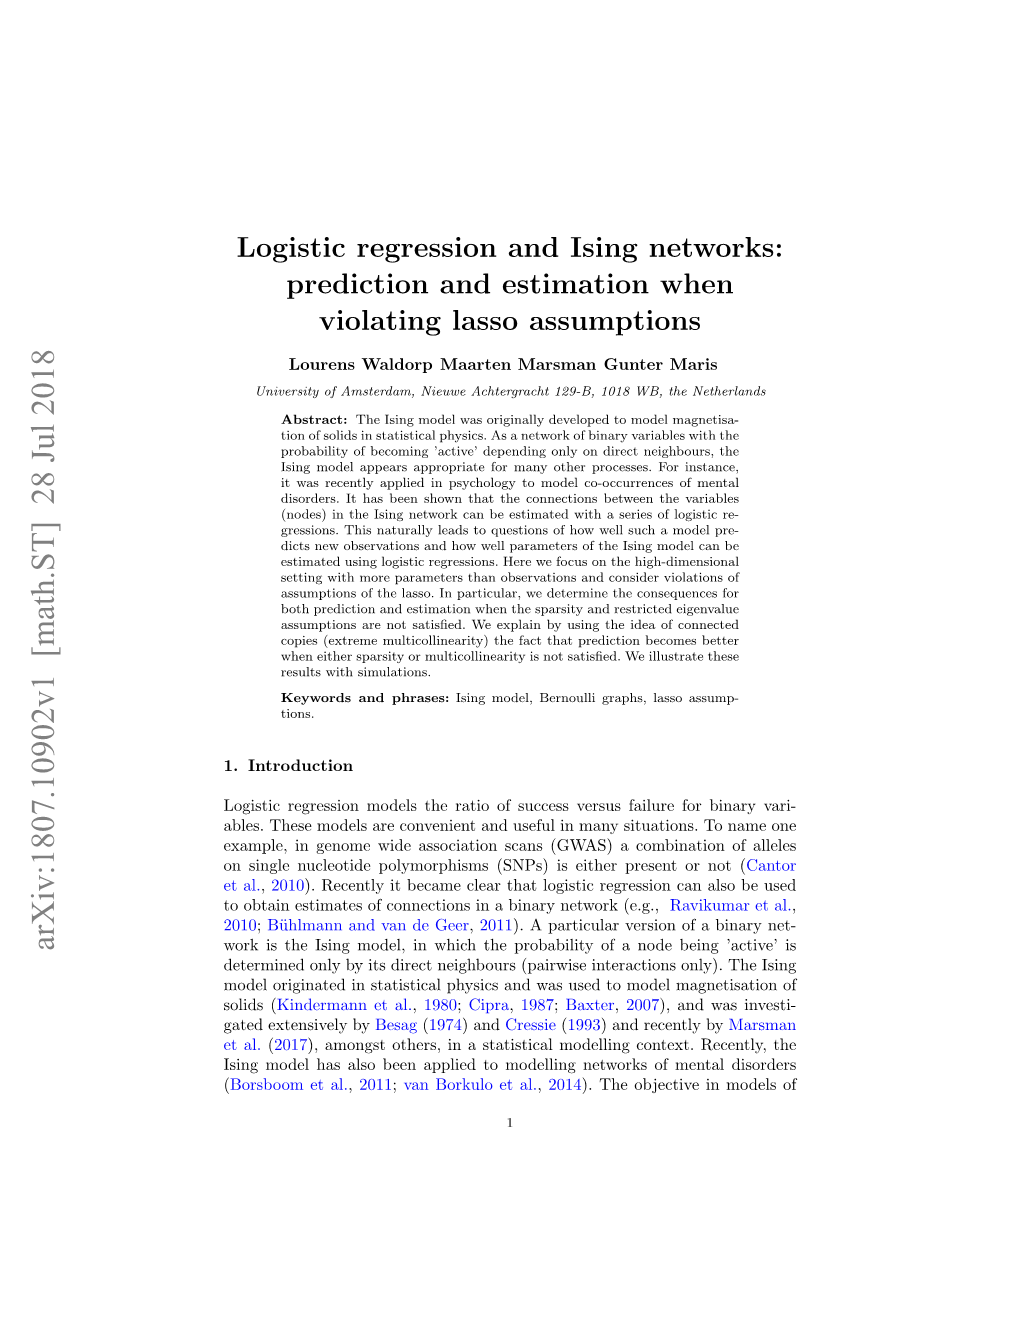 Logistic Regression and Ising Networks: Prediction and Estimation When Violating Lasso Assumptions